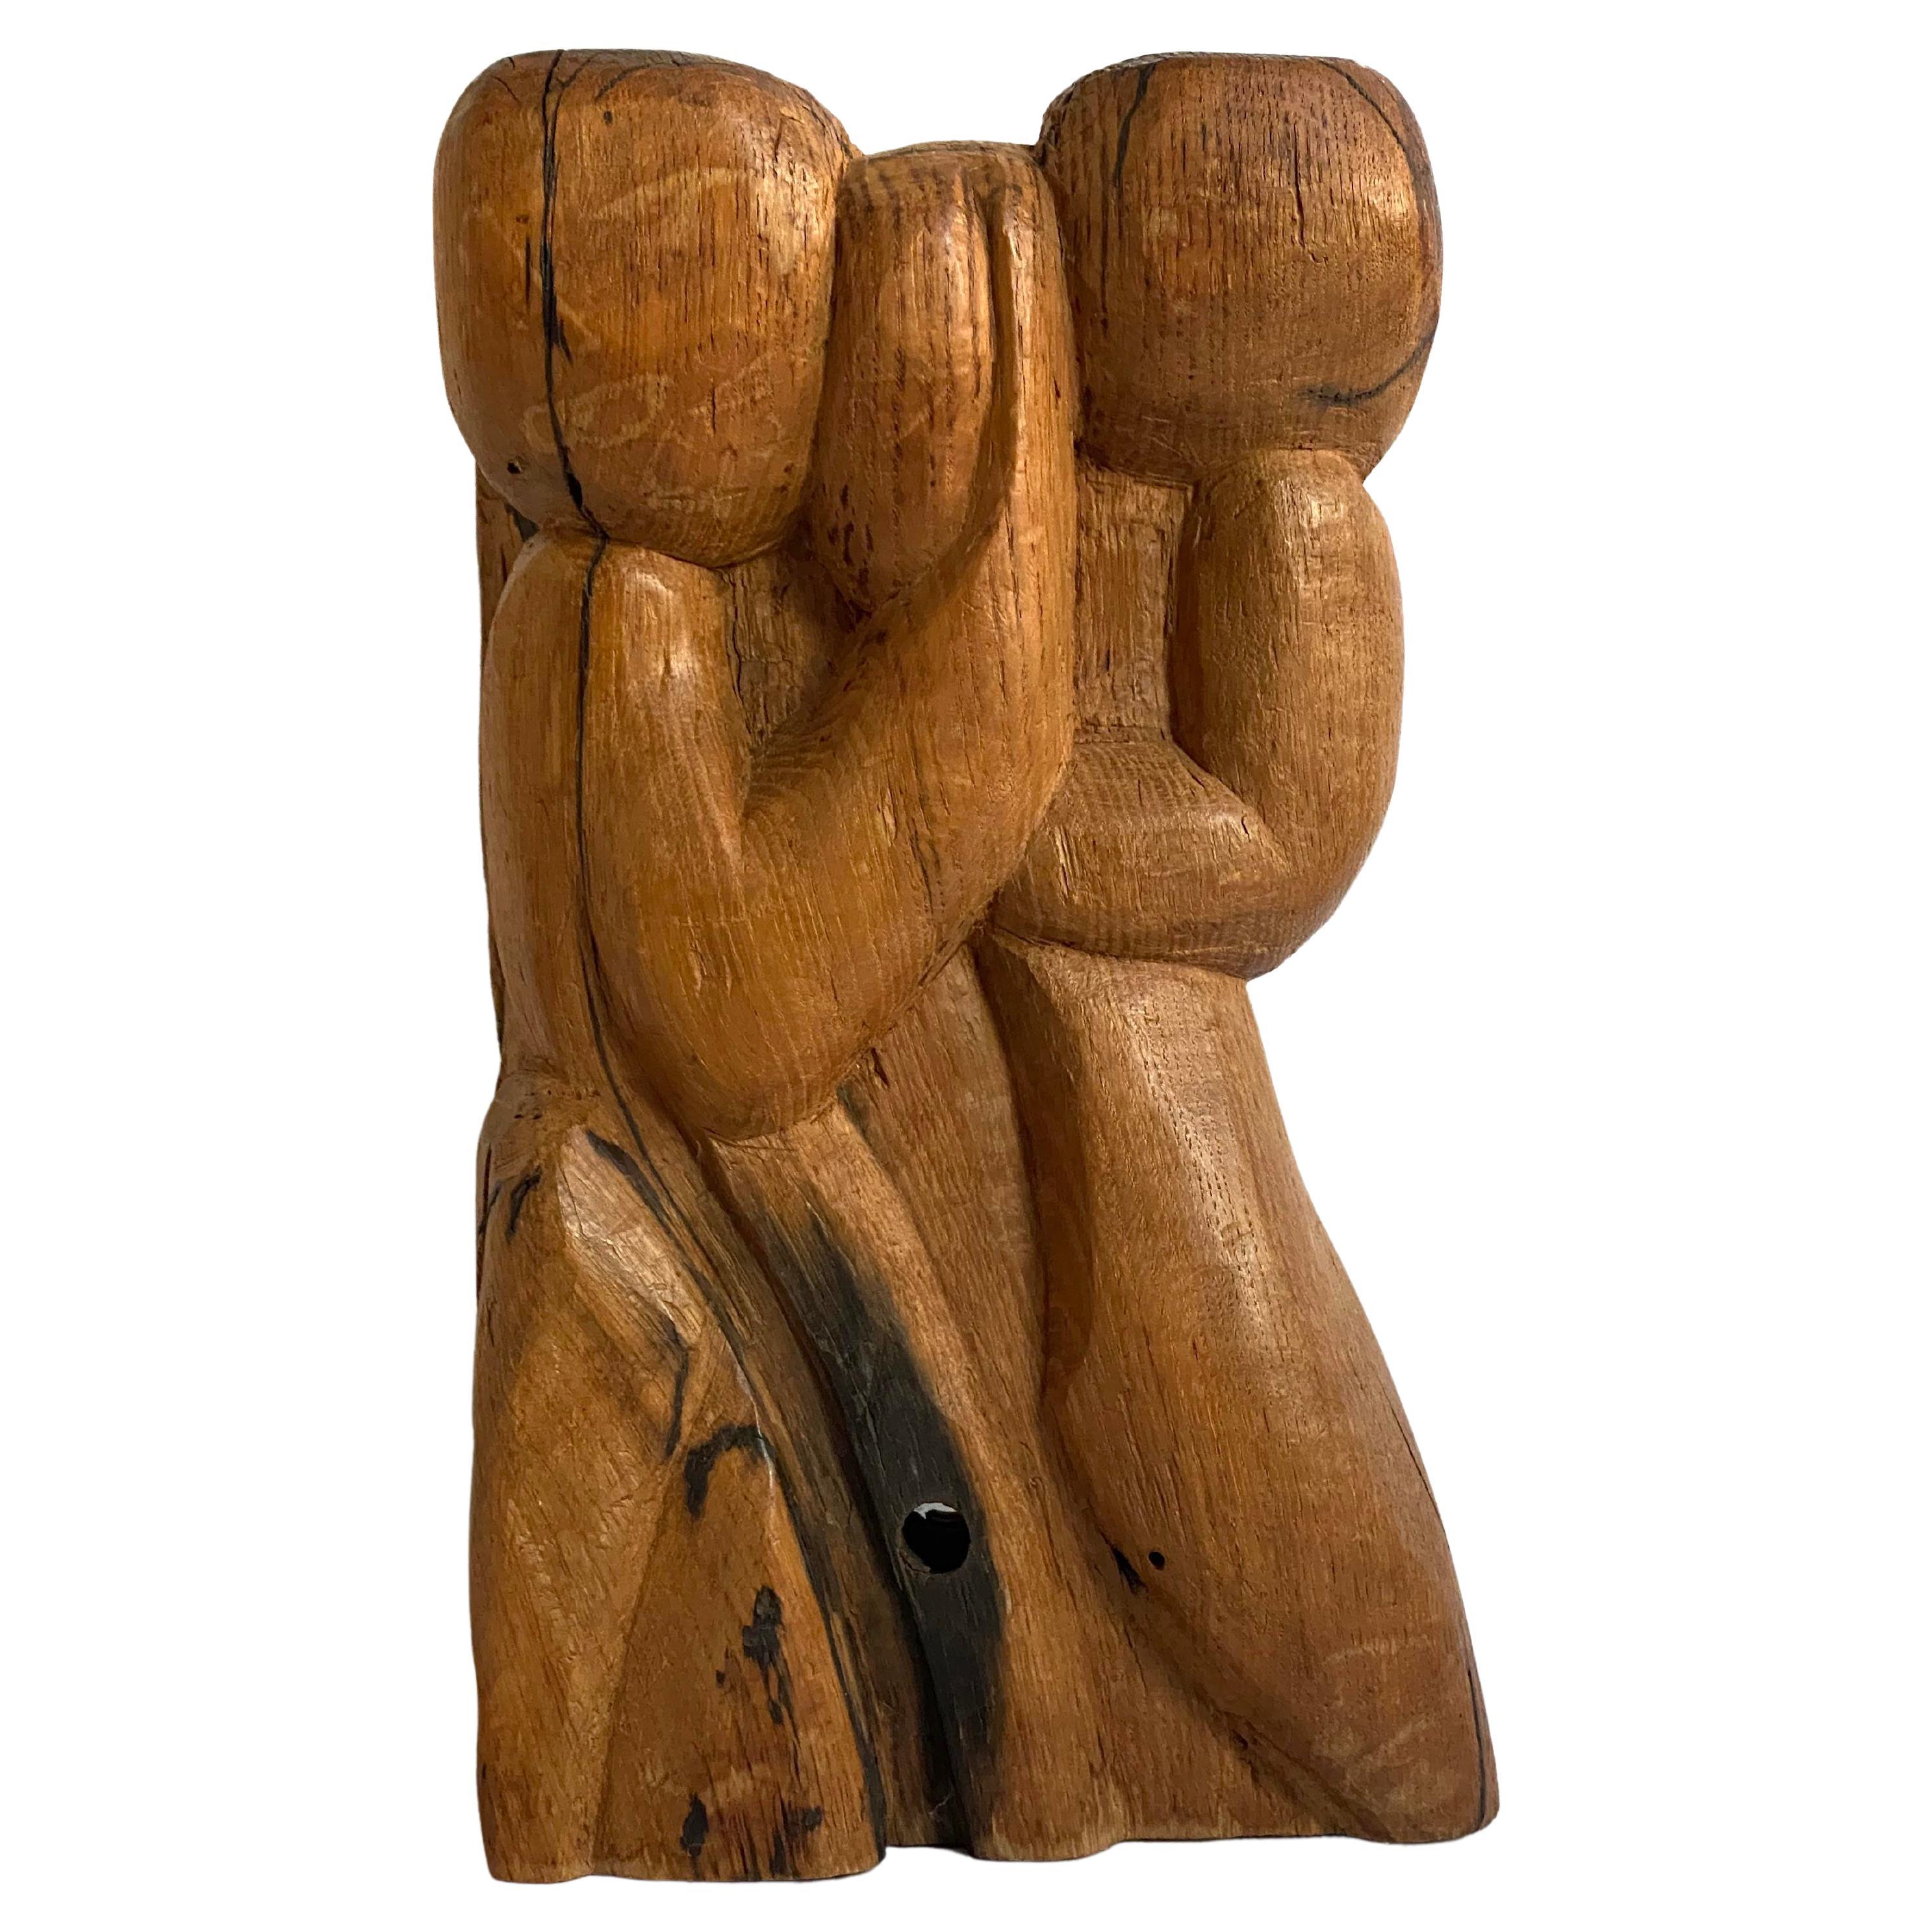 Brutalist Mid-Century Modern Hand-Carved Solid Wood Sculpture “TWINS" 1970s